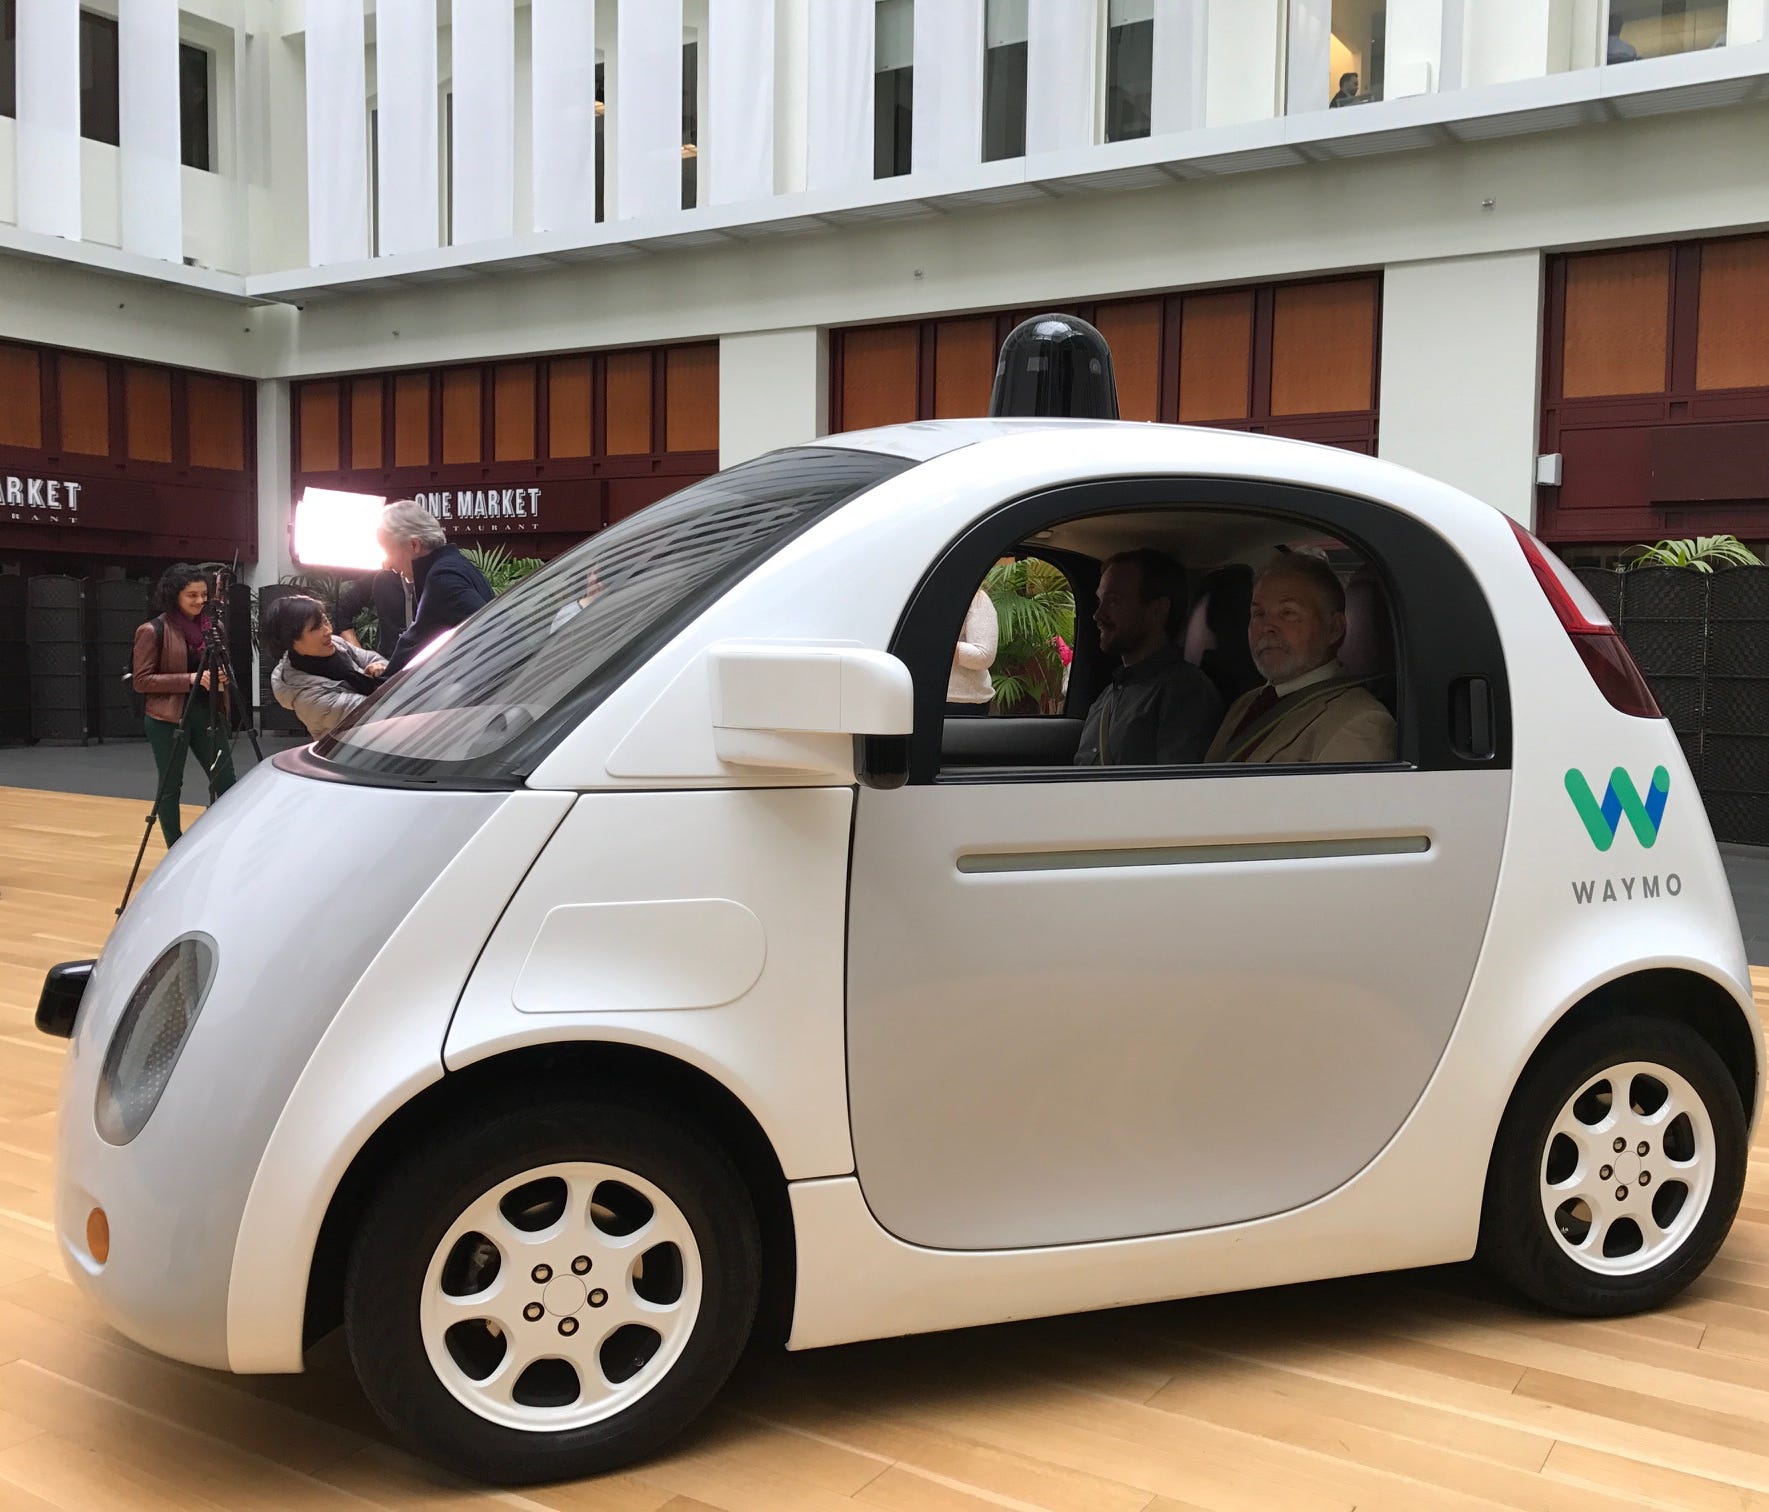 Waymo, the newly renamed Google self-driving car company, showed off its two seat prototype and new logo in the lobby of a San Francisco building Tuesday.